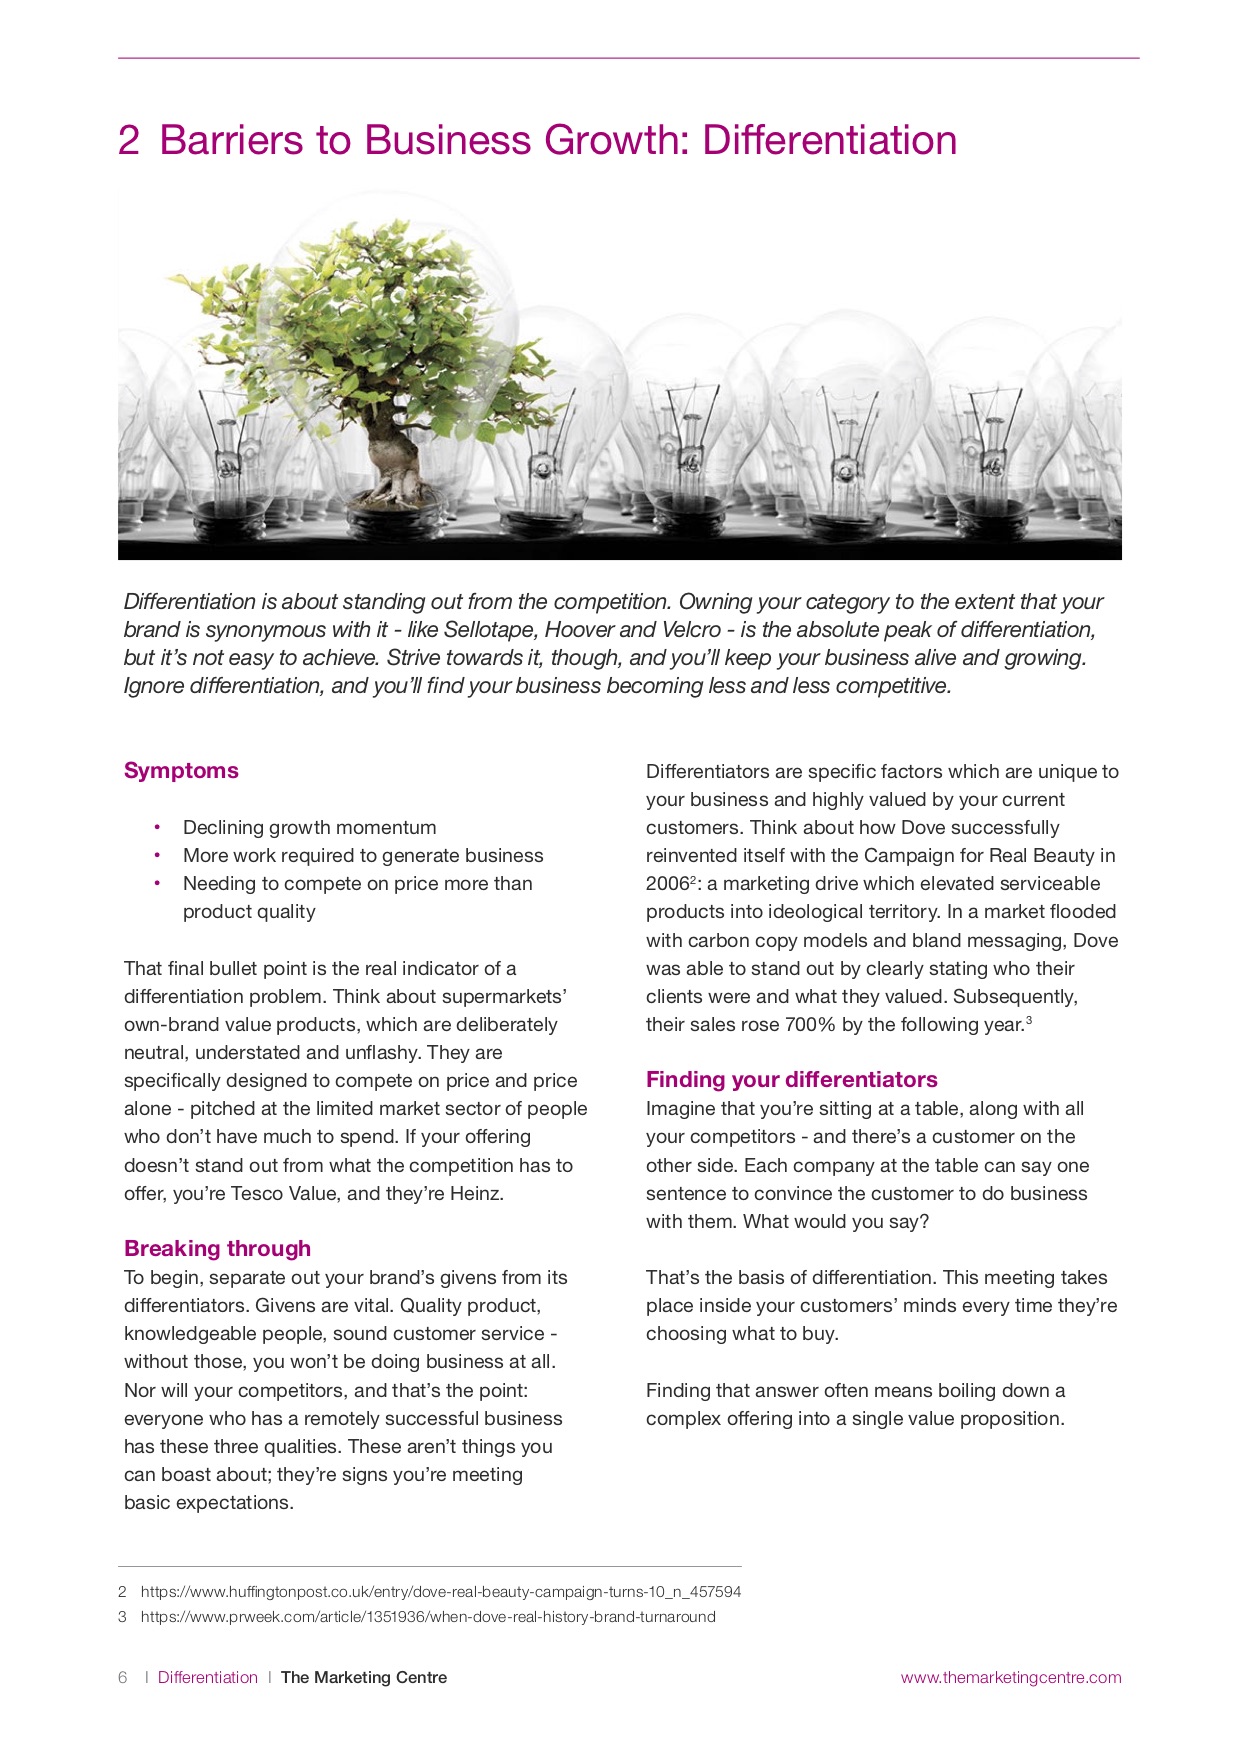 Barriers to Business Growth Page 6